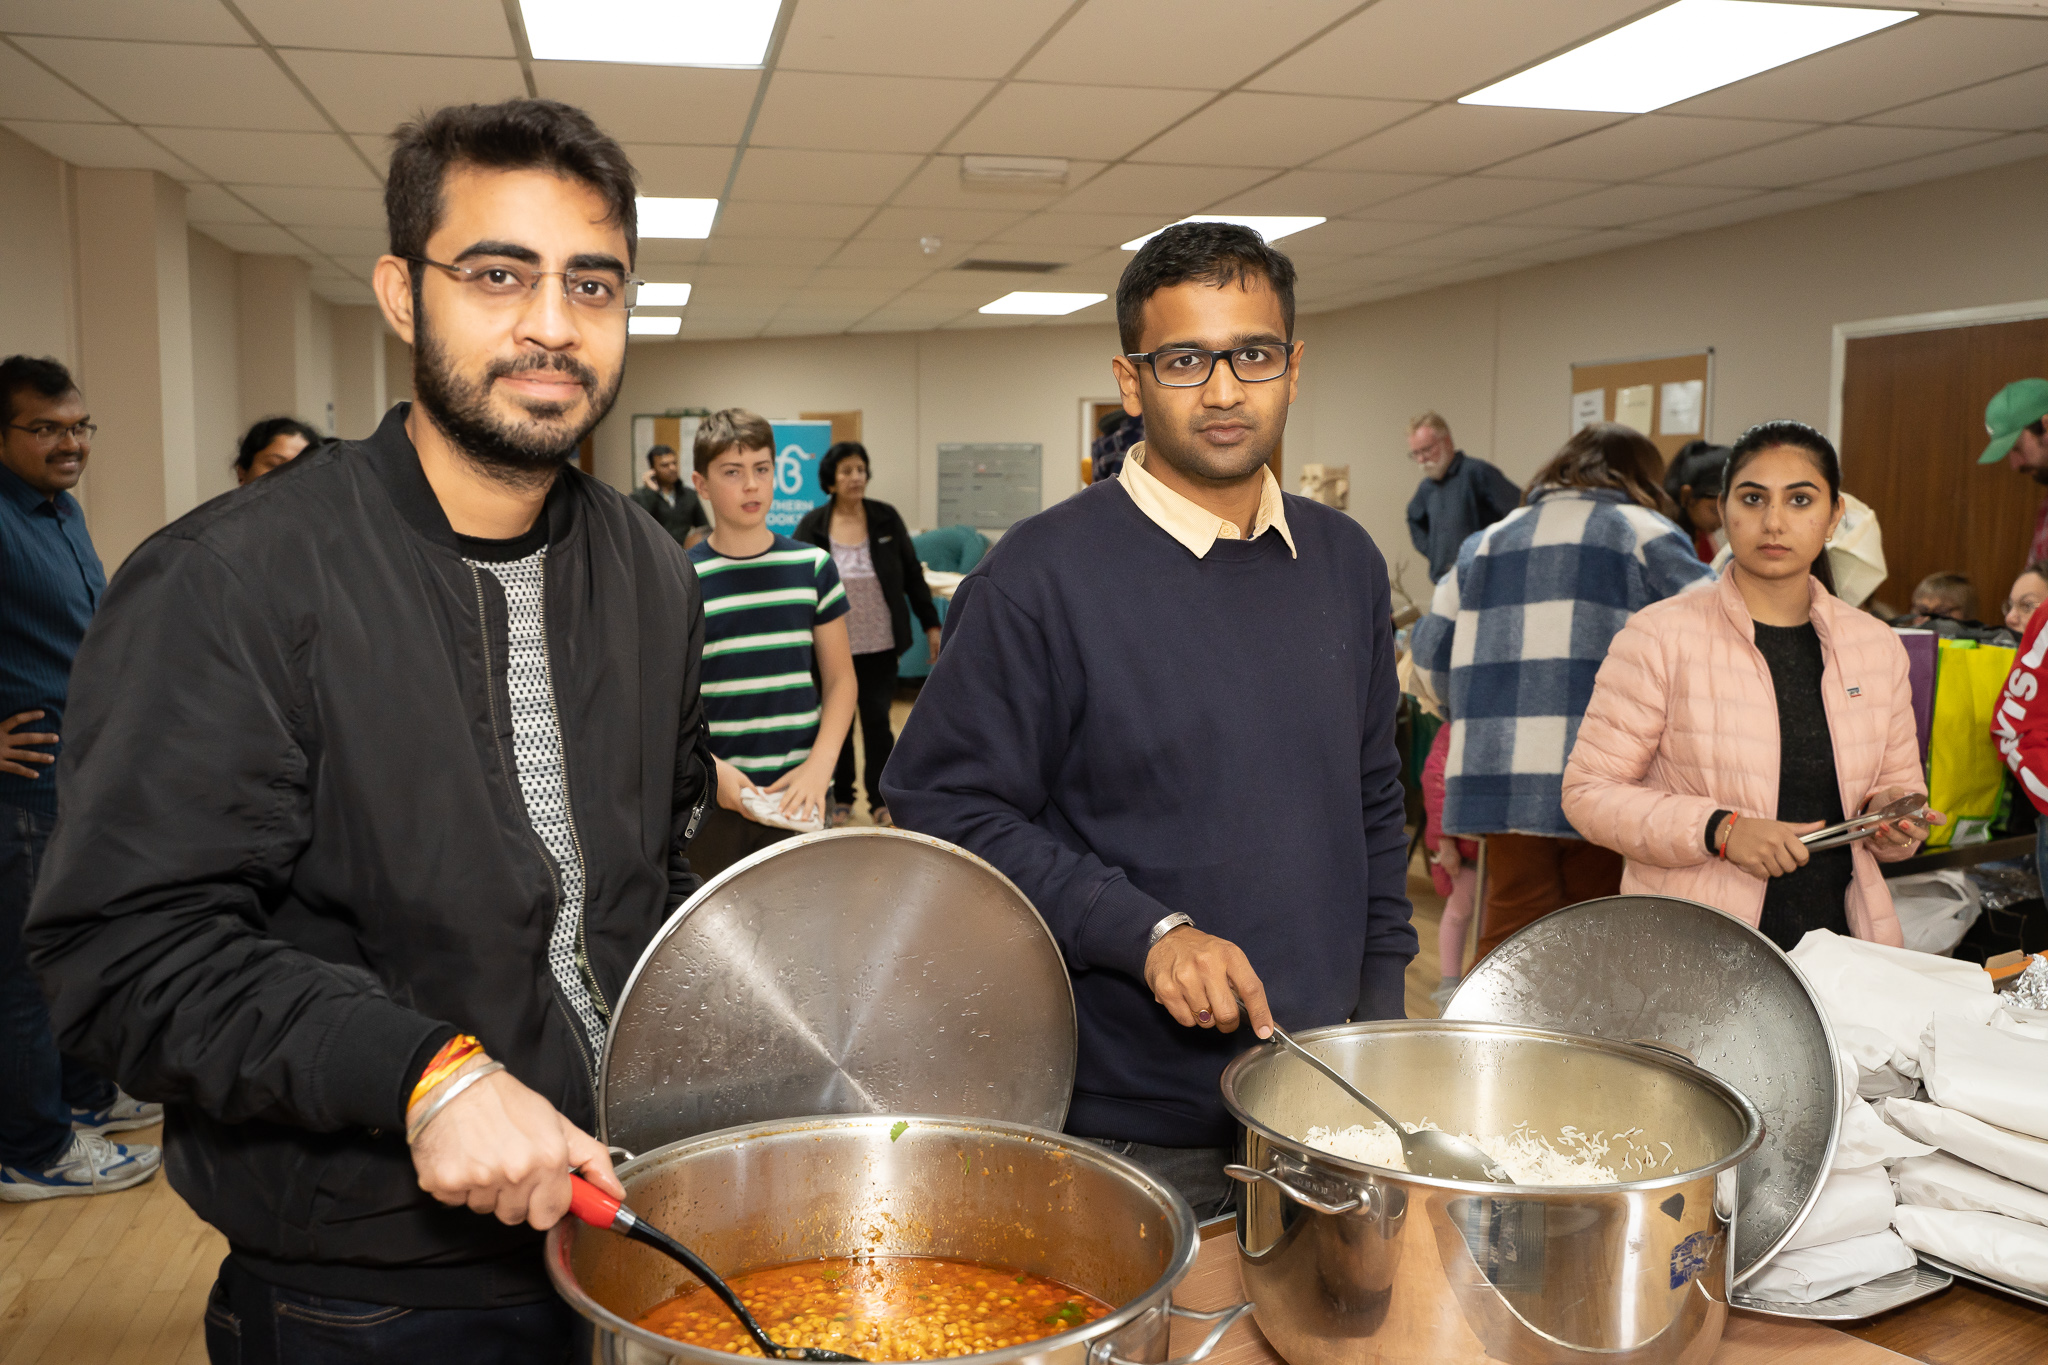 Volunteers serving food at a free community food event organised by The Aura Ion Foundation along with Southern Brooks, Sovereign Housing and Avon Indian Community Association.